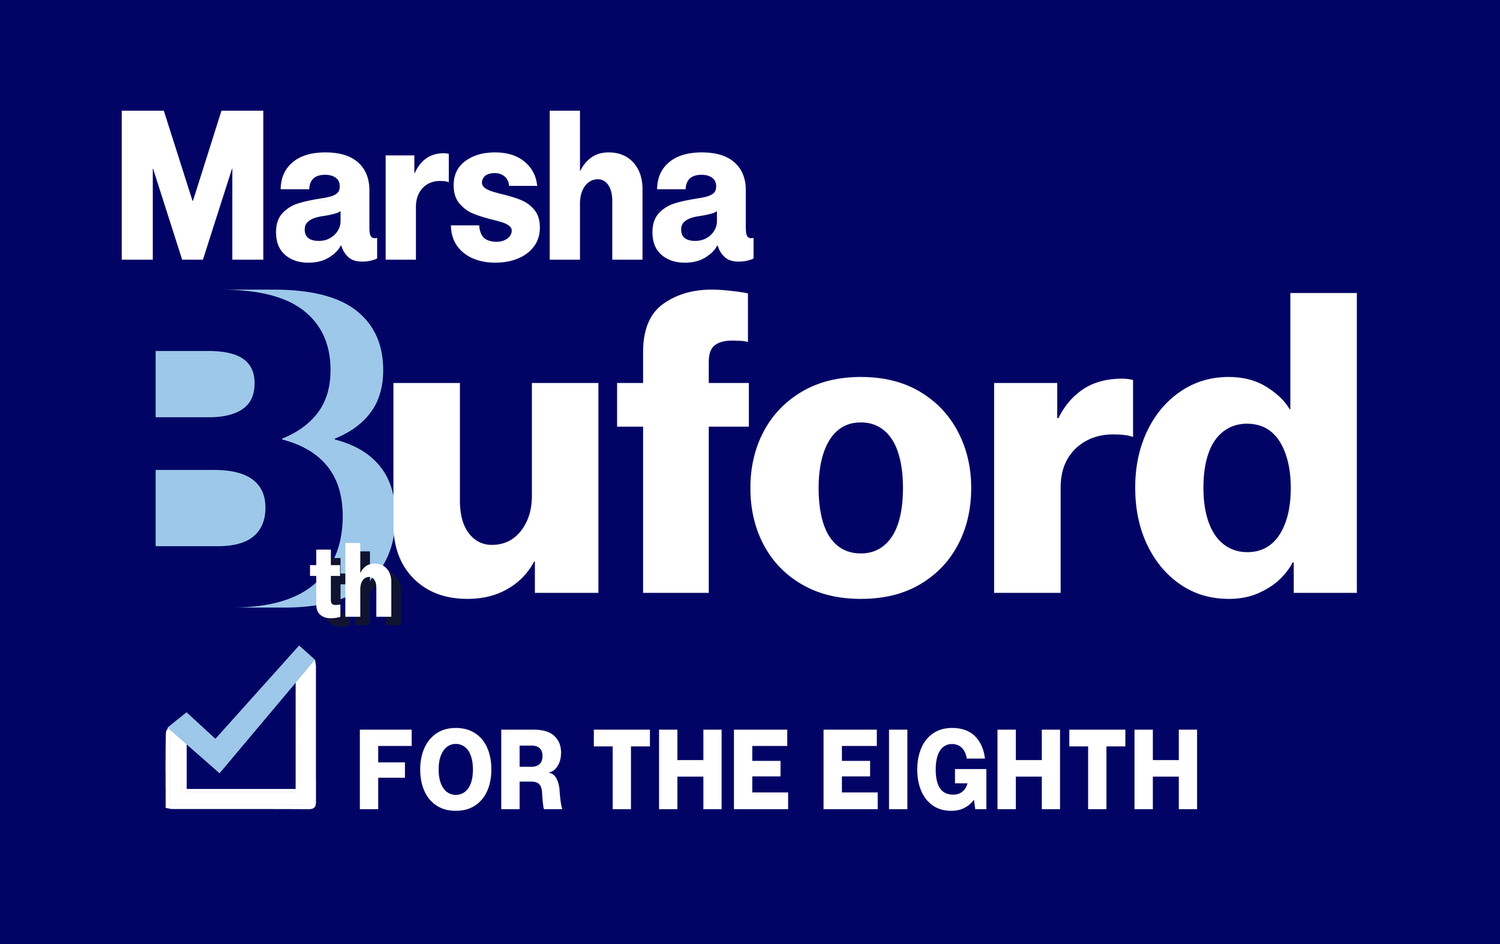 Marsha Buford for the 8th